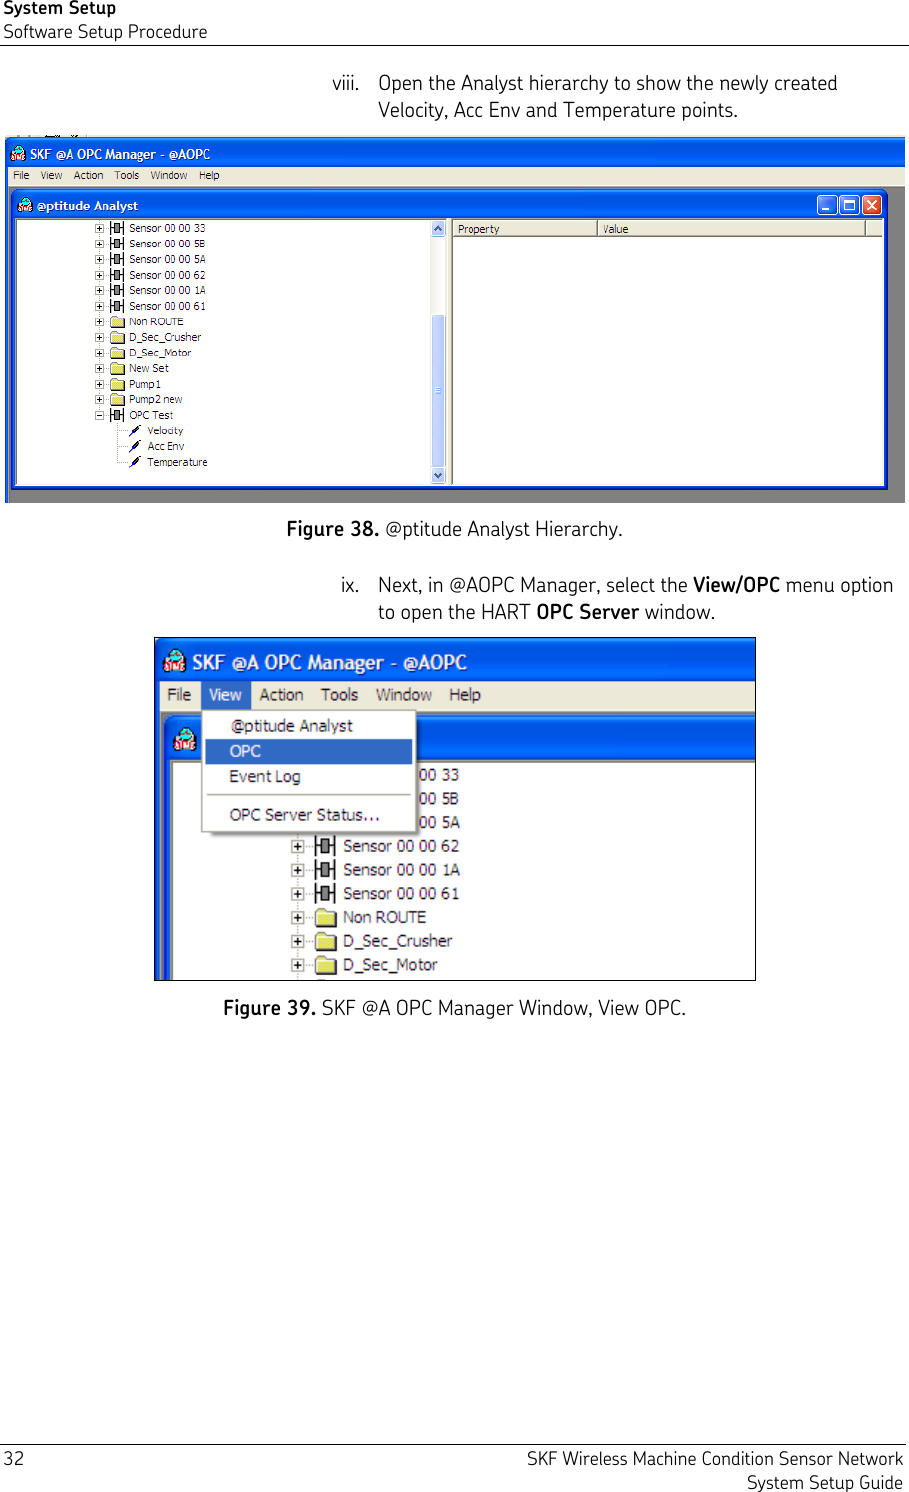 System Setup Software Setup Procedure 32  SKF Wireless Machine Condition Sensor Network System Setup Guide viii. Open the Analyst hierarchy to show the newly created Velocity, Acc Env and Temperature points.  Figure 38. @ptitude Analyst Hierarchy. ix. Next, in @AOPC Manager, select the View/OPC menu option to open the HART OPC Server window.  Figure 39. SKF @A OPC Manager Window, View OPC. 